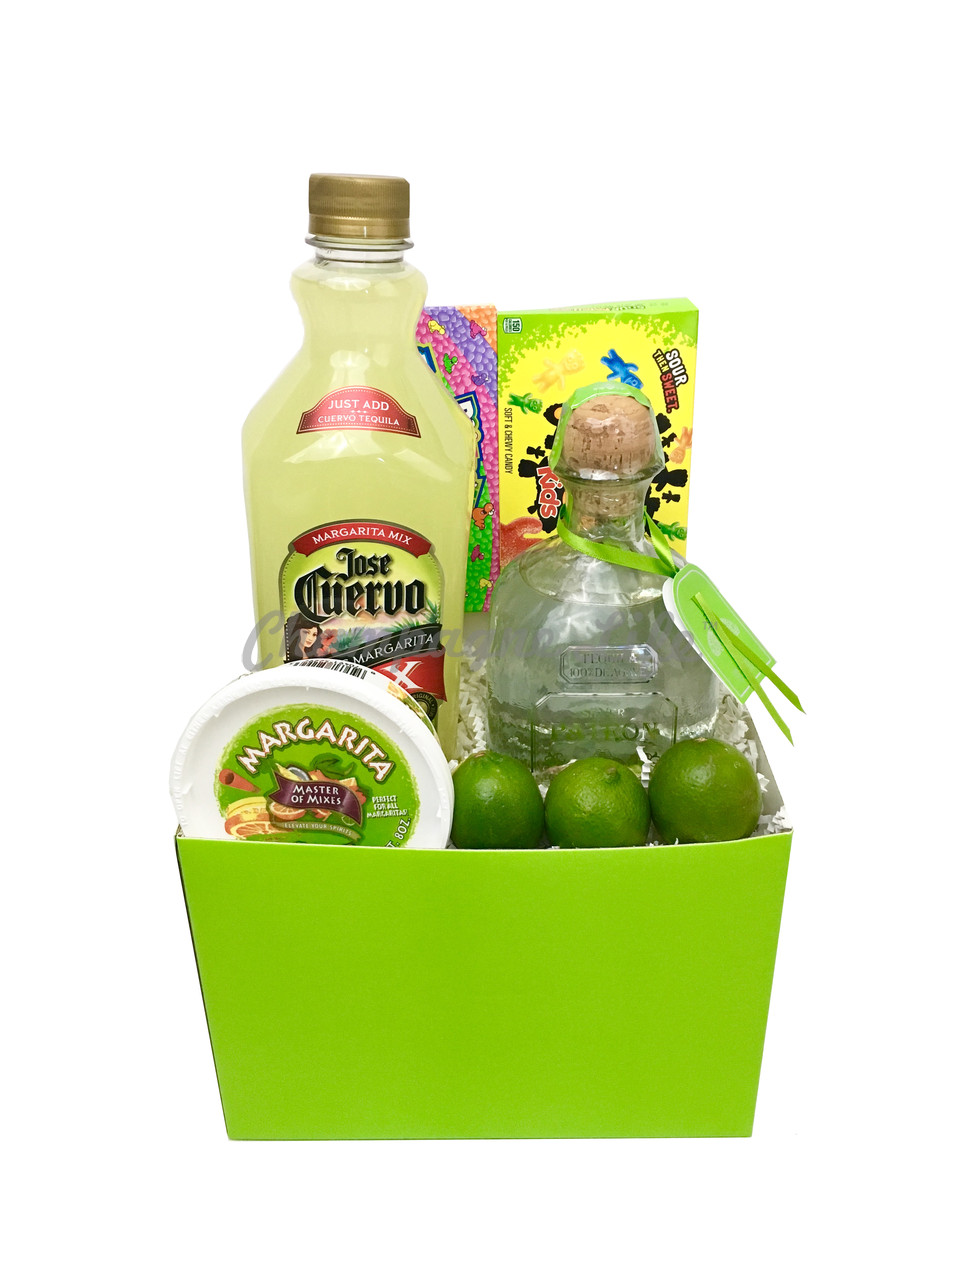 Tequila Gift Basket Ideas
 Patron Silver Gift Basket Box Champagne Life Gift Baskets